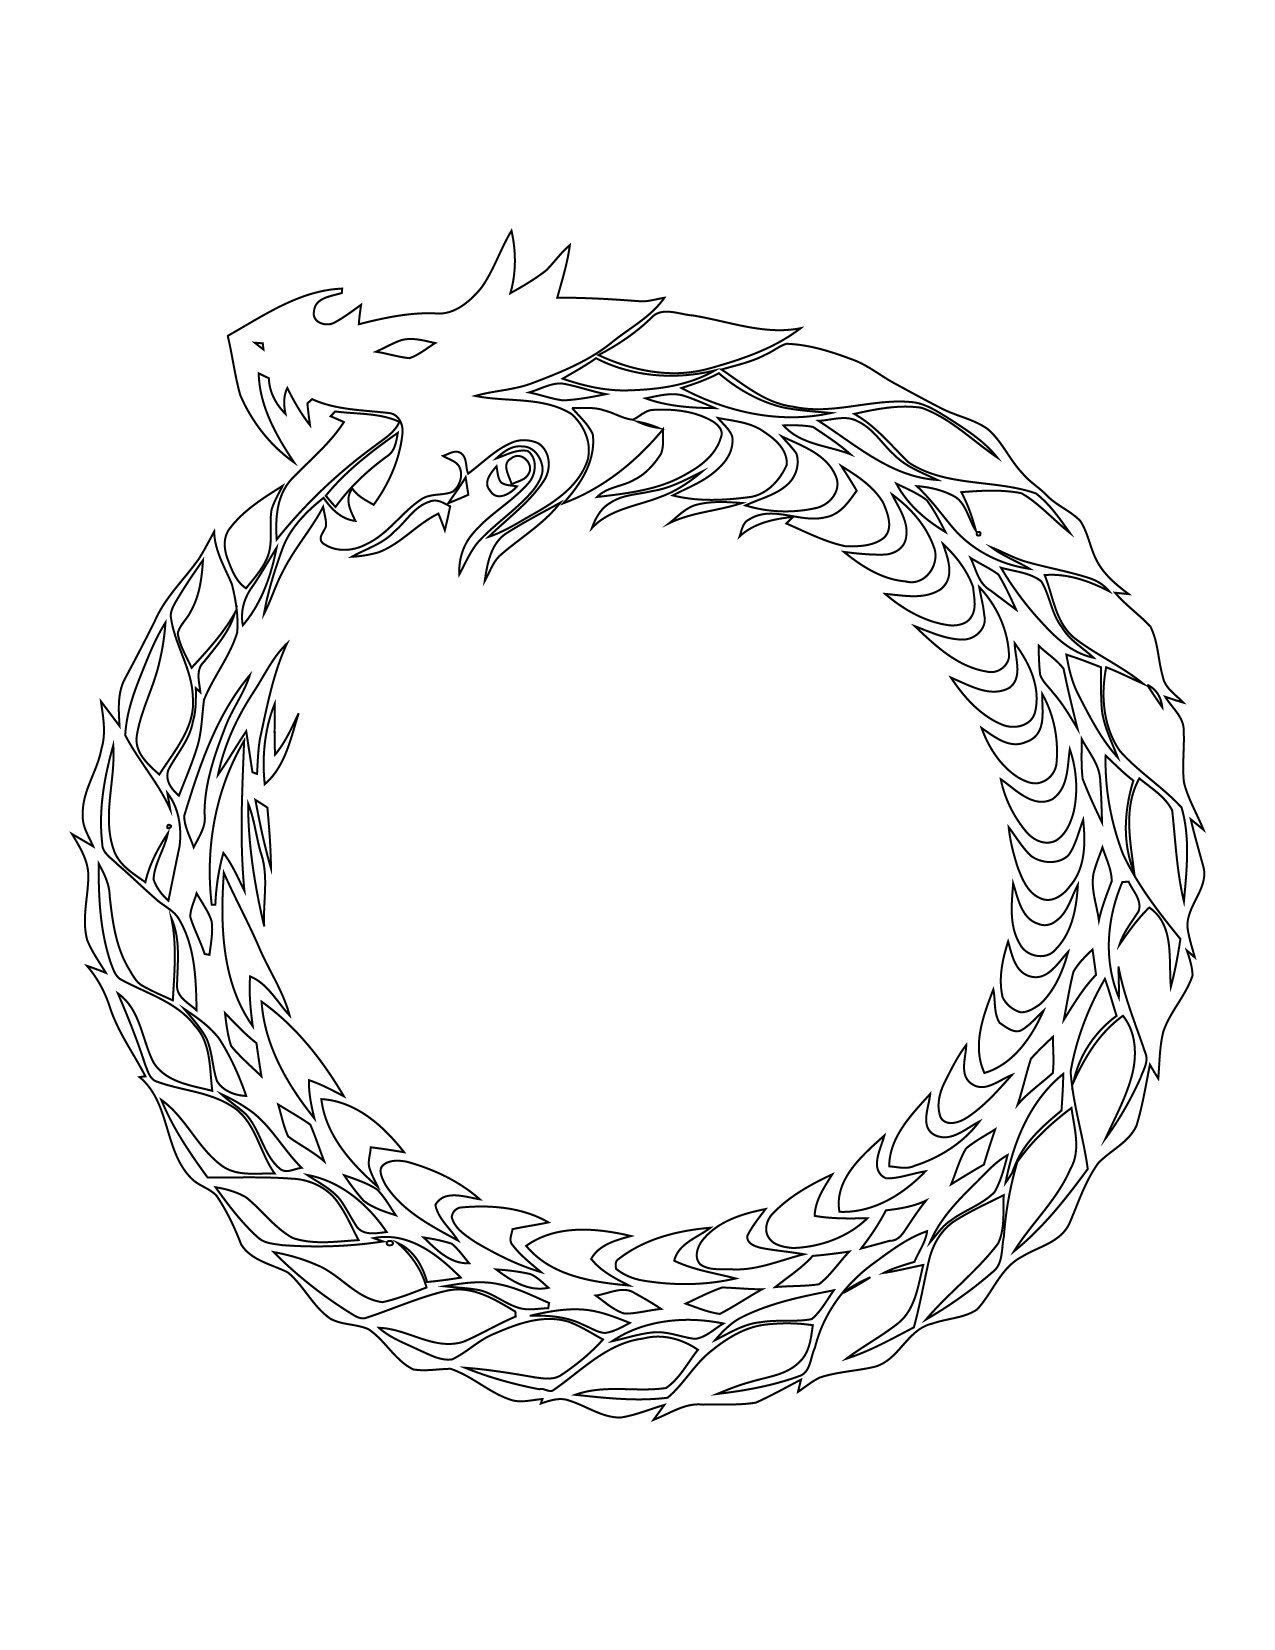 Ouroboros Snake Eating Tail Coloring Page